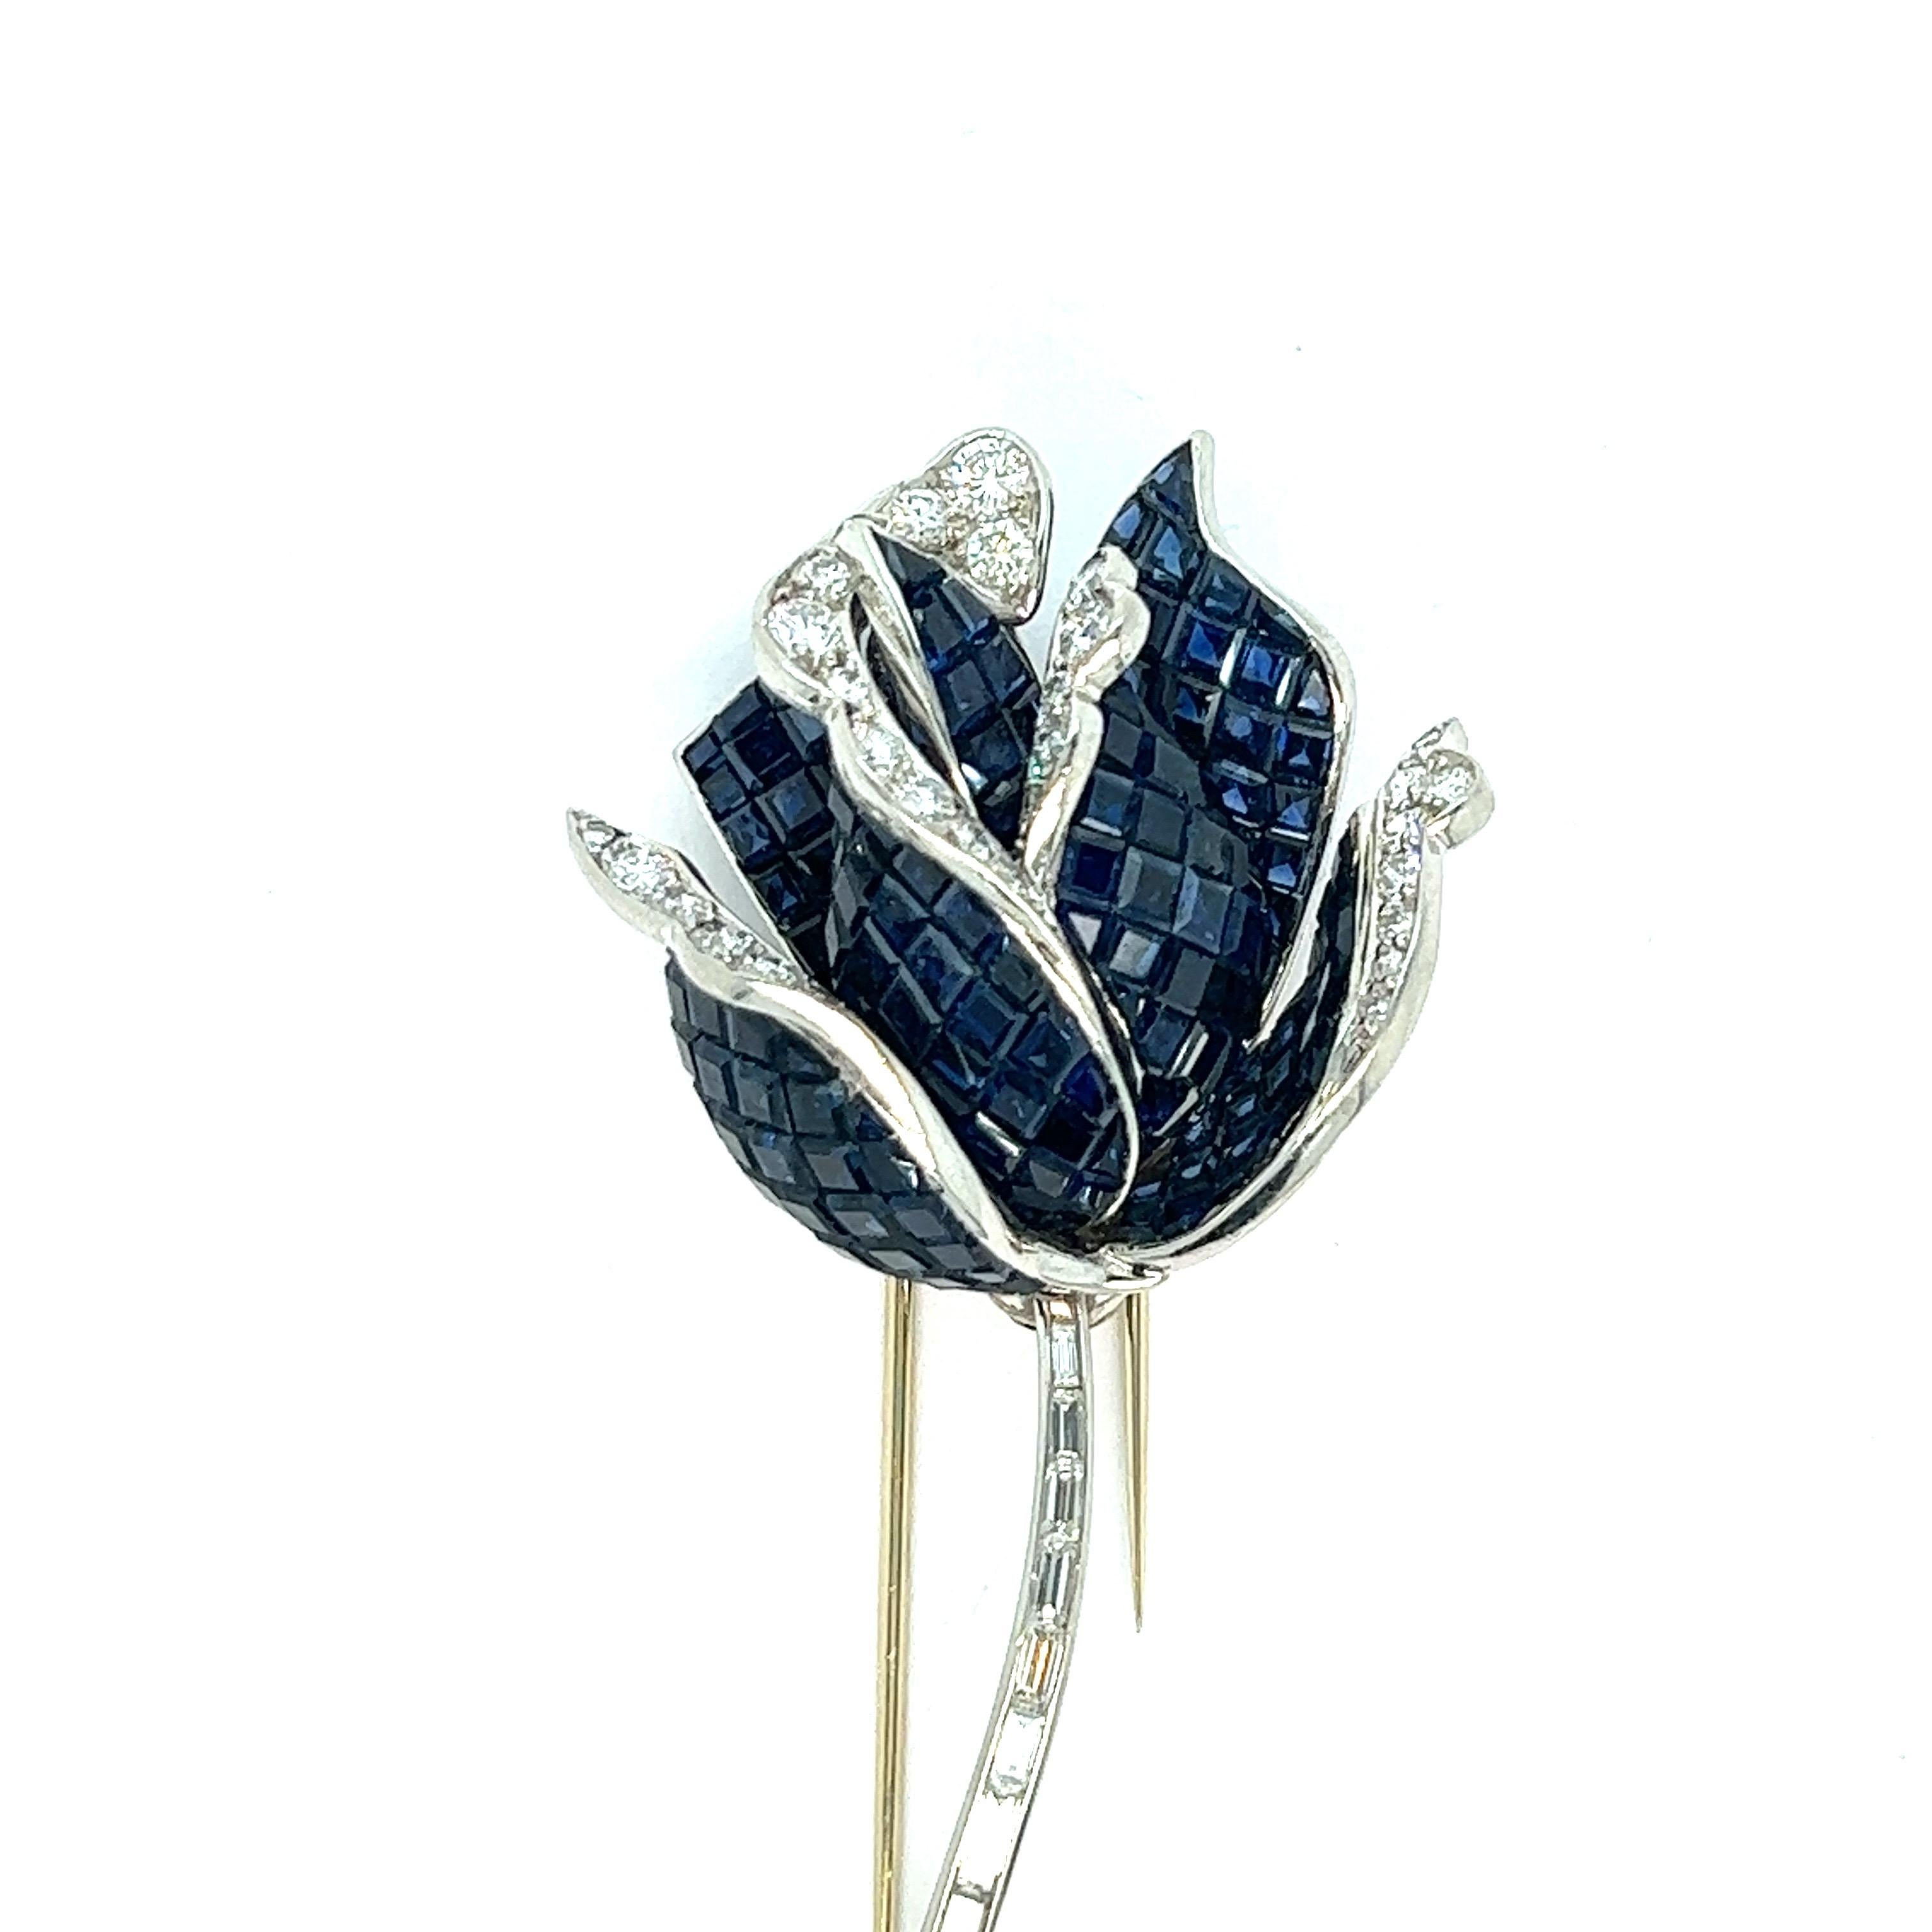 Sapphire diamond rose brooch

1950s very high quality French brooch, featuring invisible sapphire of approximately 35 carats and round- and baguette-cut diamonds of approximately 4.5 carats set in platinum; French maker's mark

Size: width 1.38